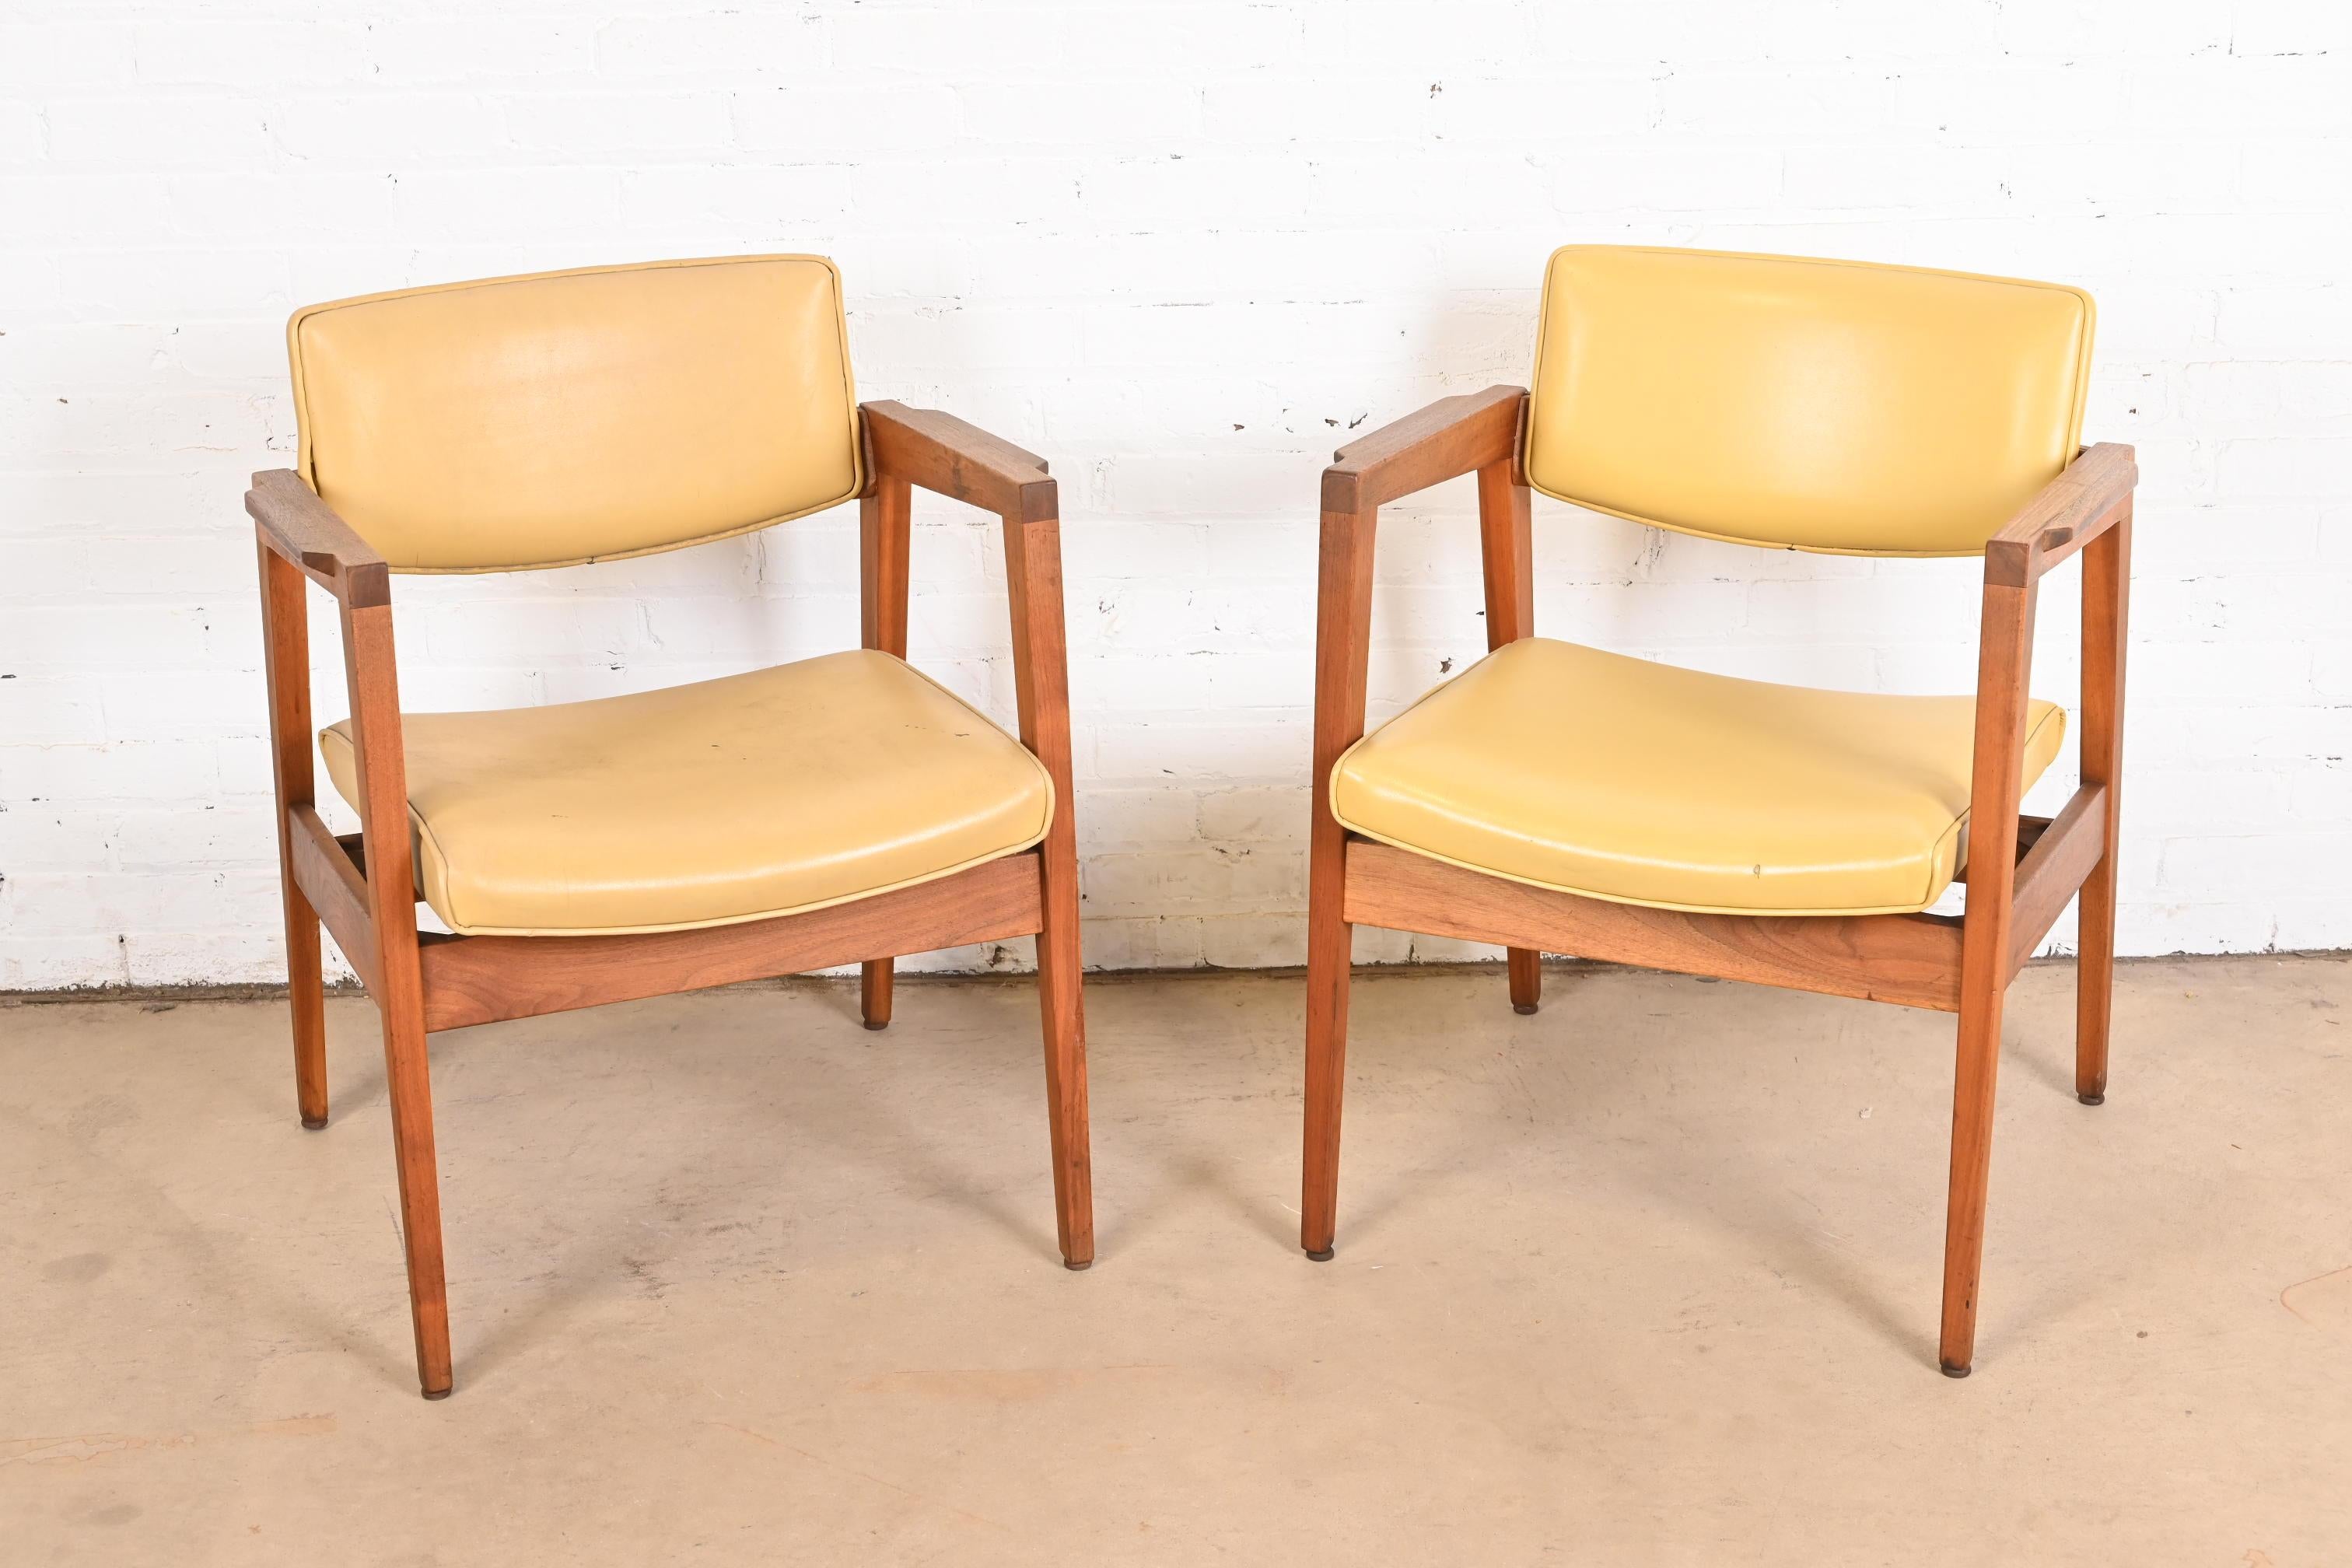 A sleek and stylish pair of Mid-Century Modern club chairs or lounge chairs

In the manner of Jens Risom

By Gunlocke

USA, 1960s

Sculpted solid walnut frames, with original yellow vinyl upholstery.

Measures: 23.75